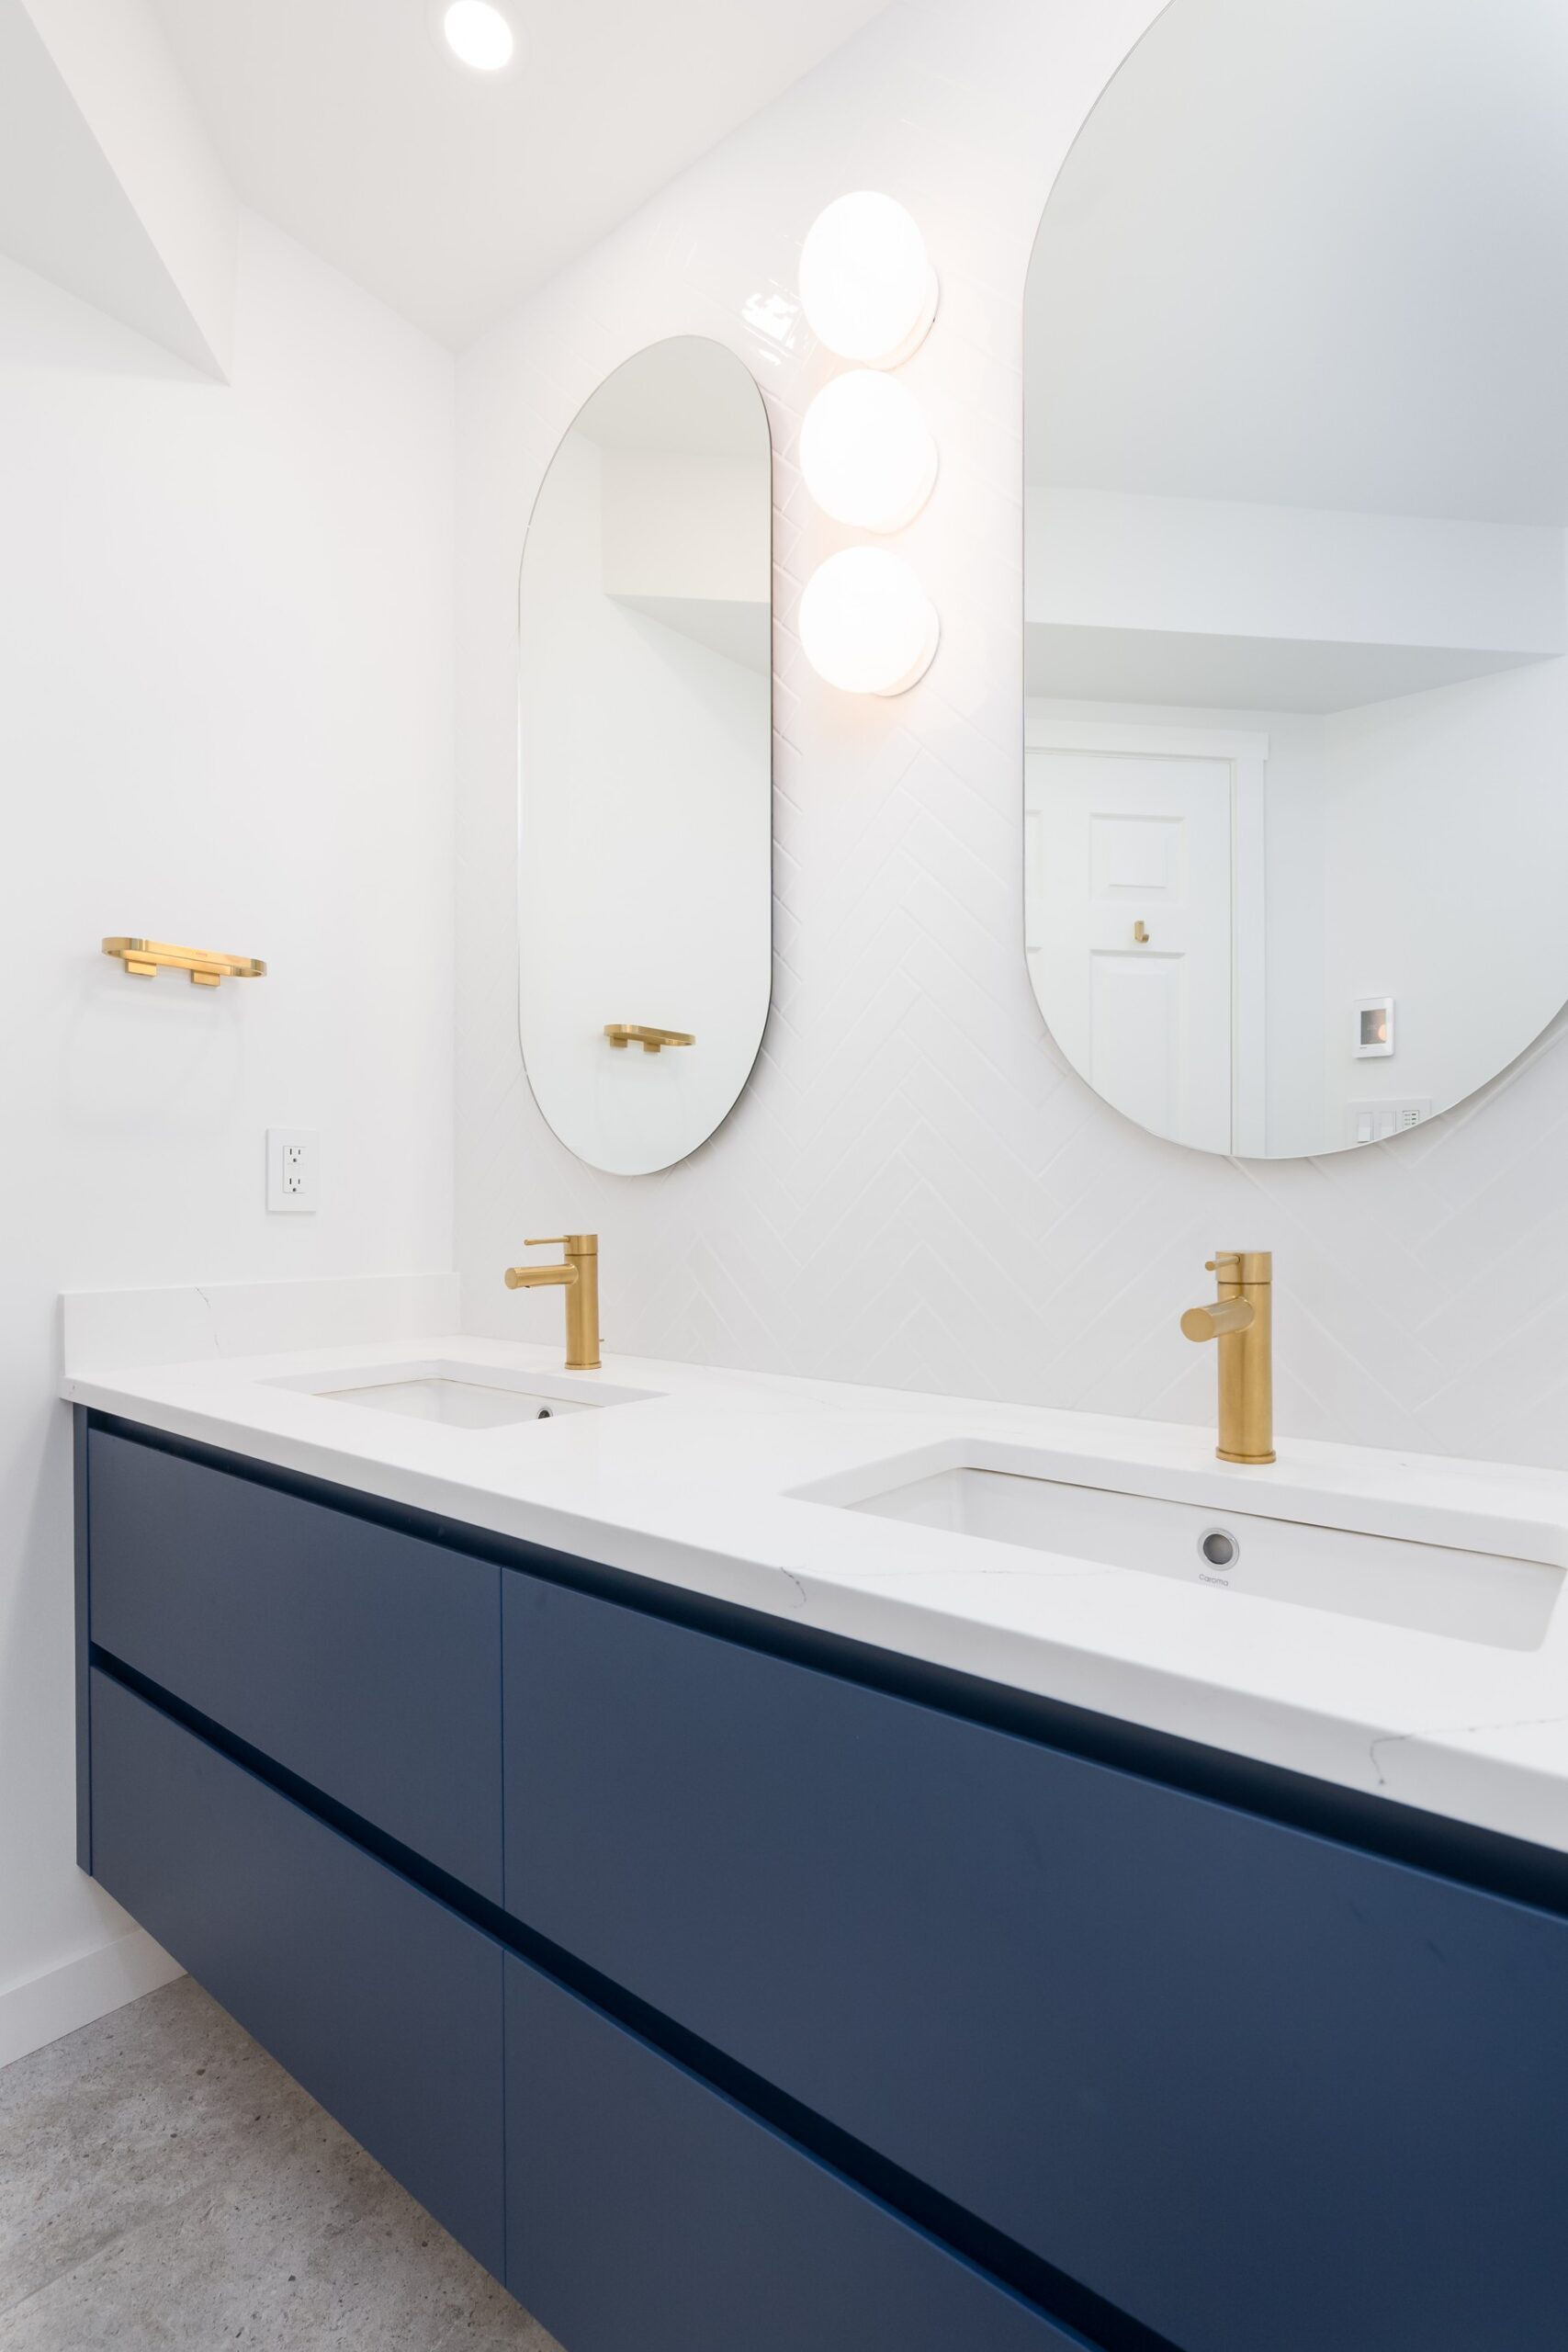 Bathroom counter with sinks and mirrors